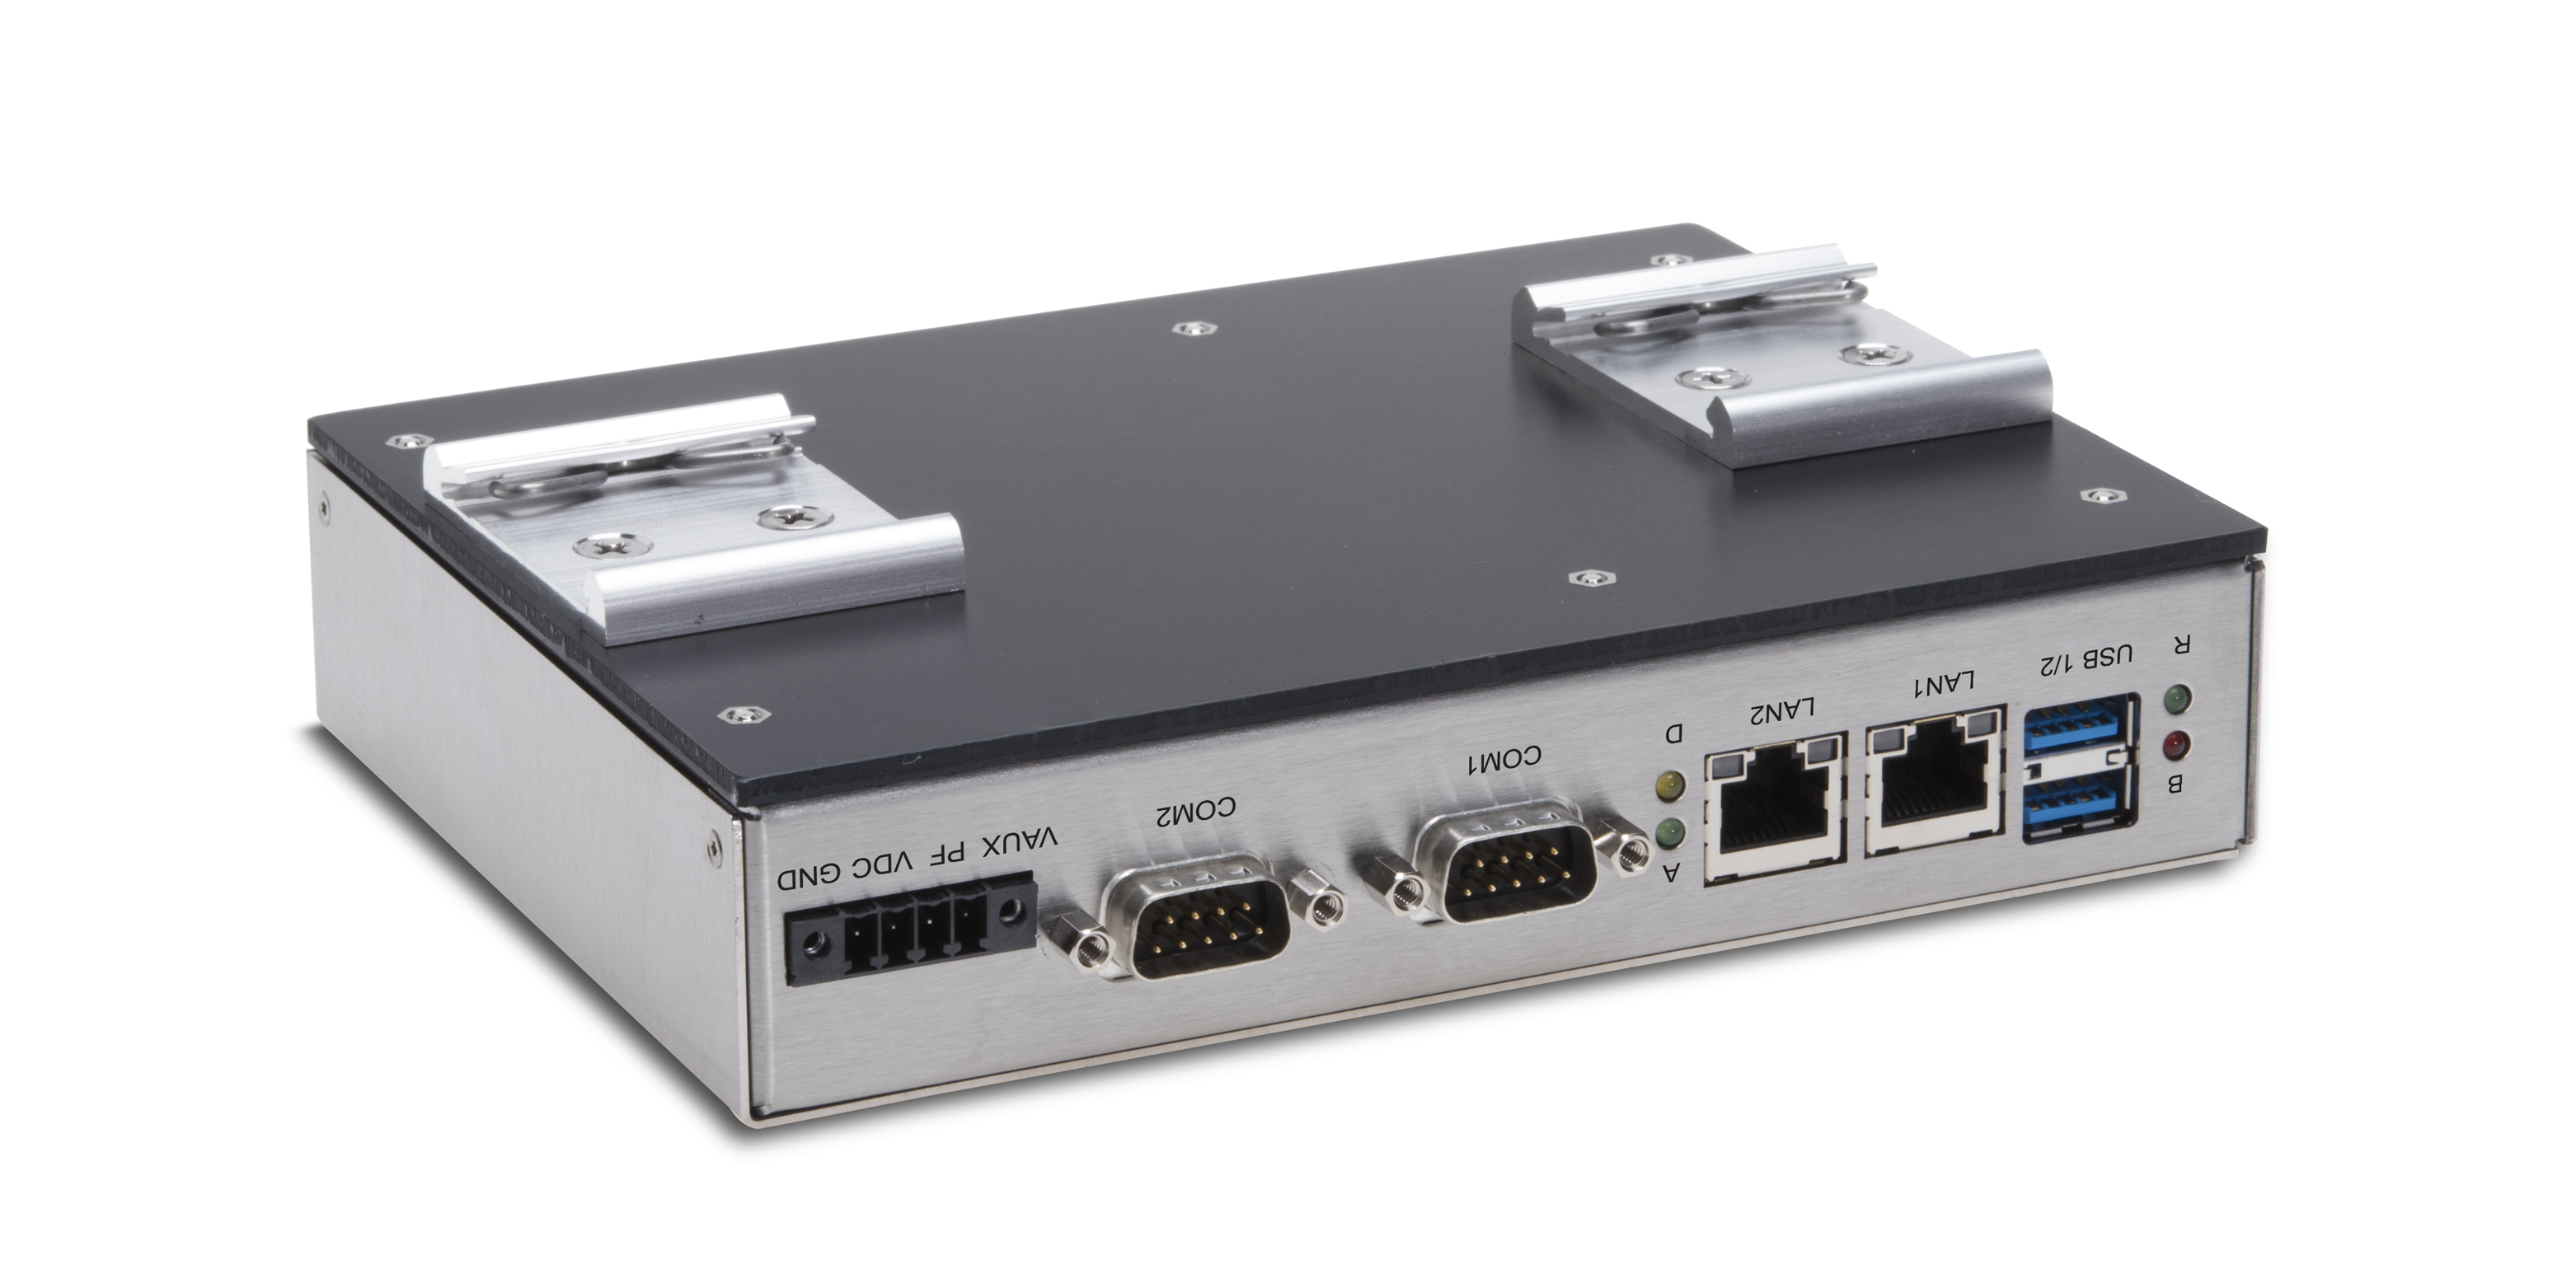 S - Embedded Box PC COMPACT8 Syslogic